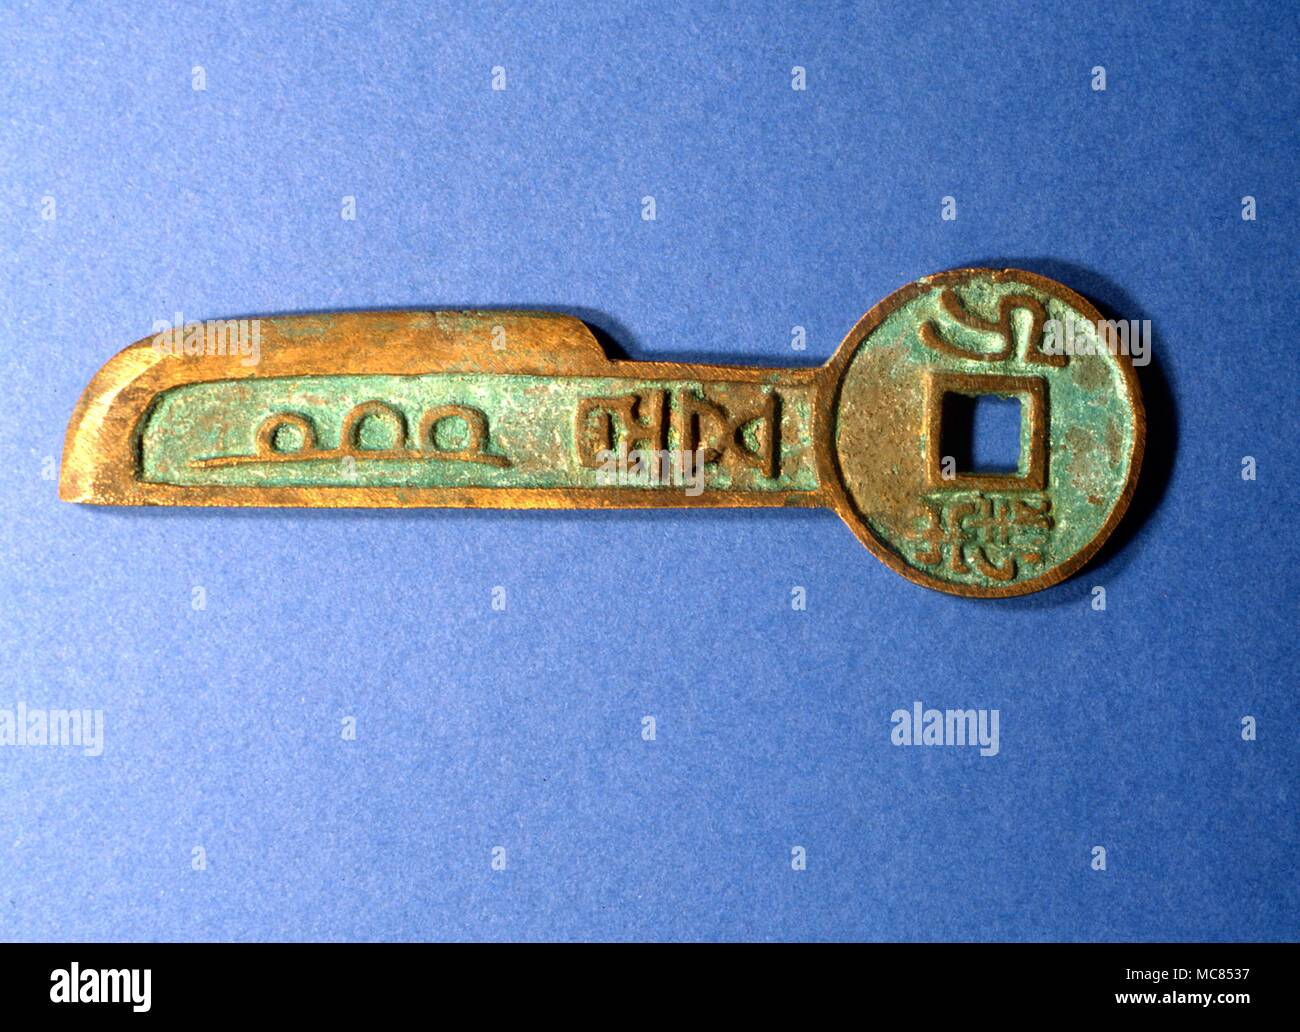 Chinese Mythology Knife money, or key money, once used in China as a form of currency. From China Stock Photo